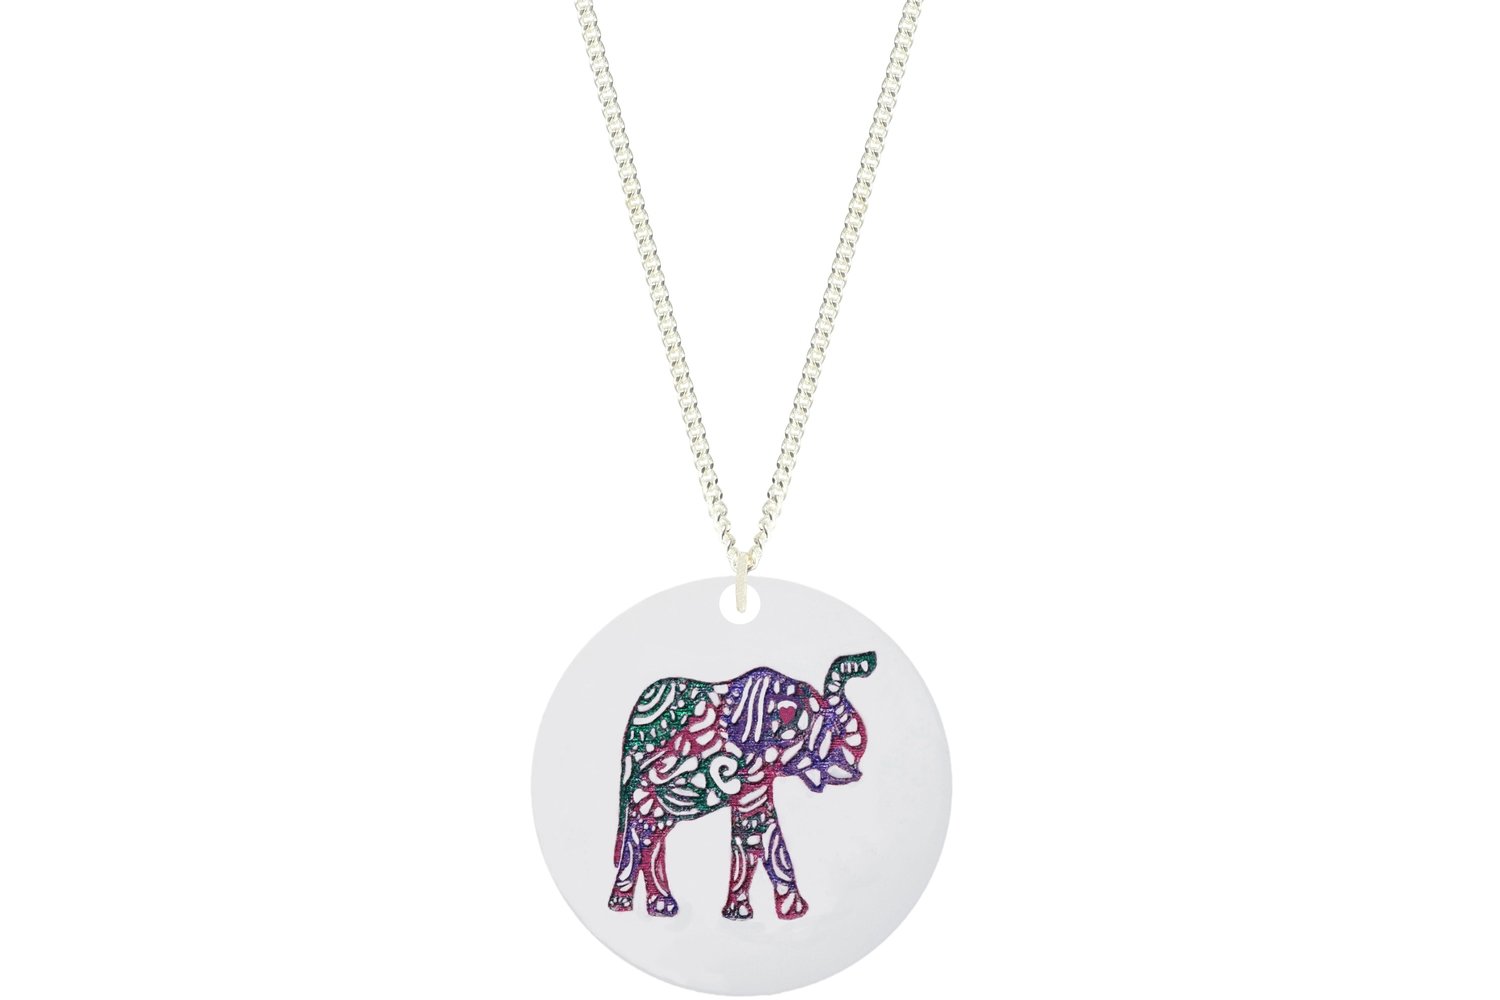 Elephant Aztec Pendant Hand Painted Style on Chain Necklace